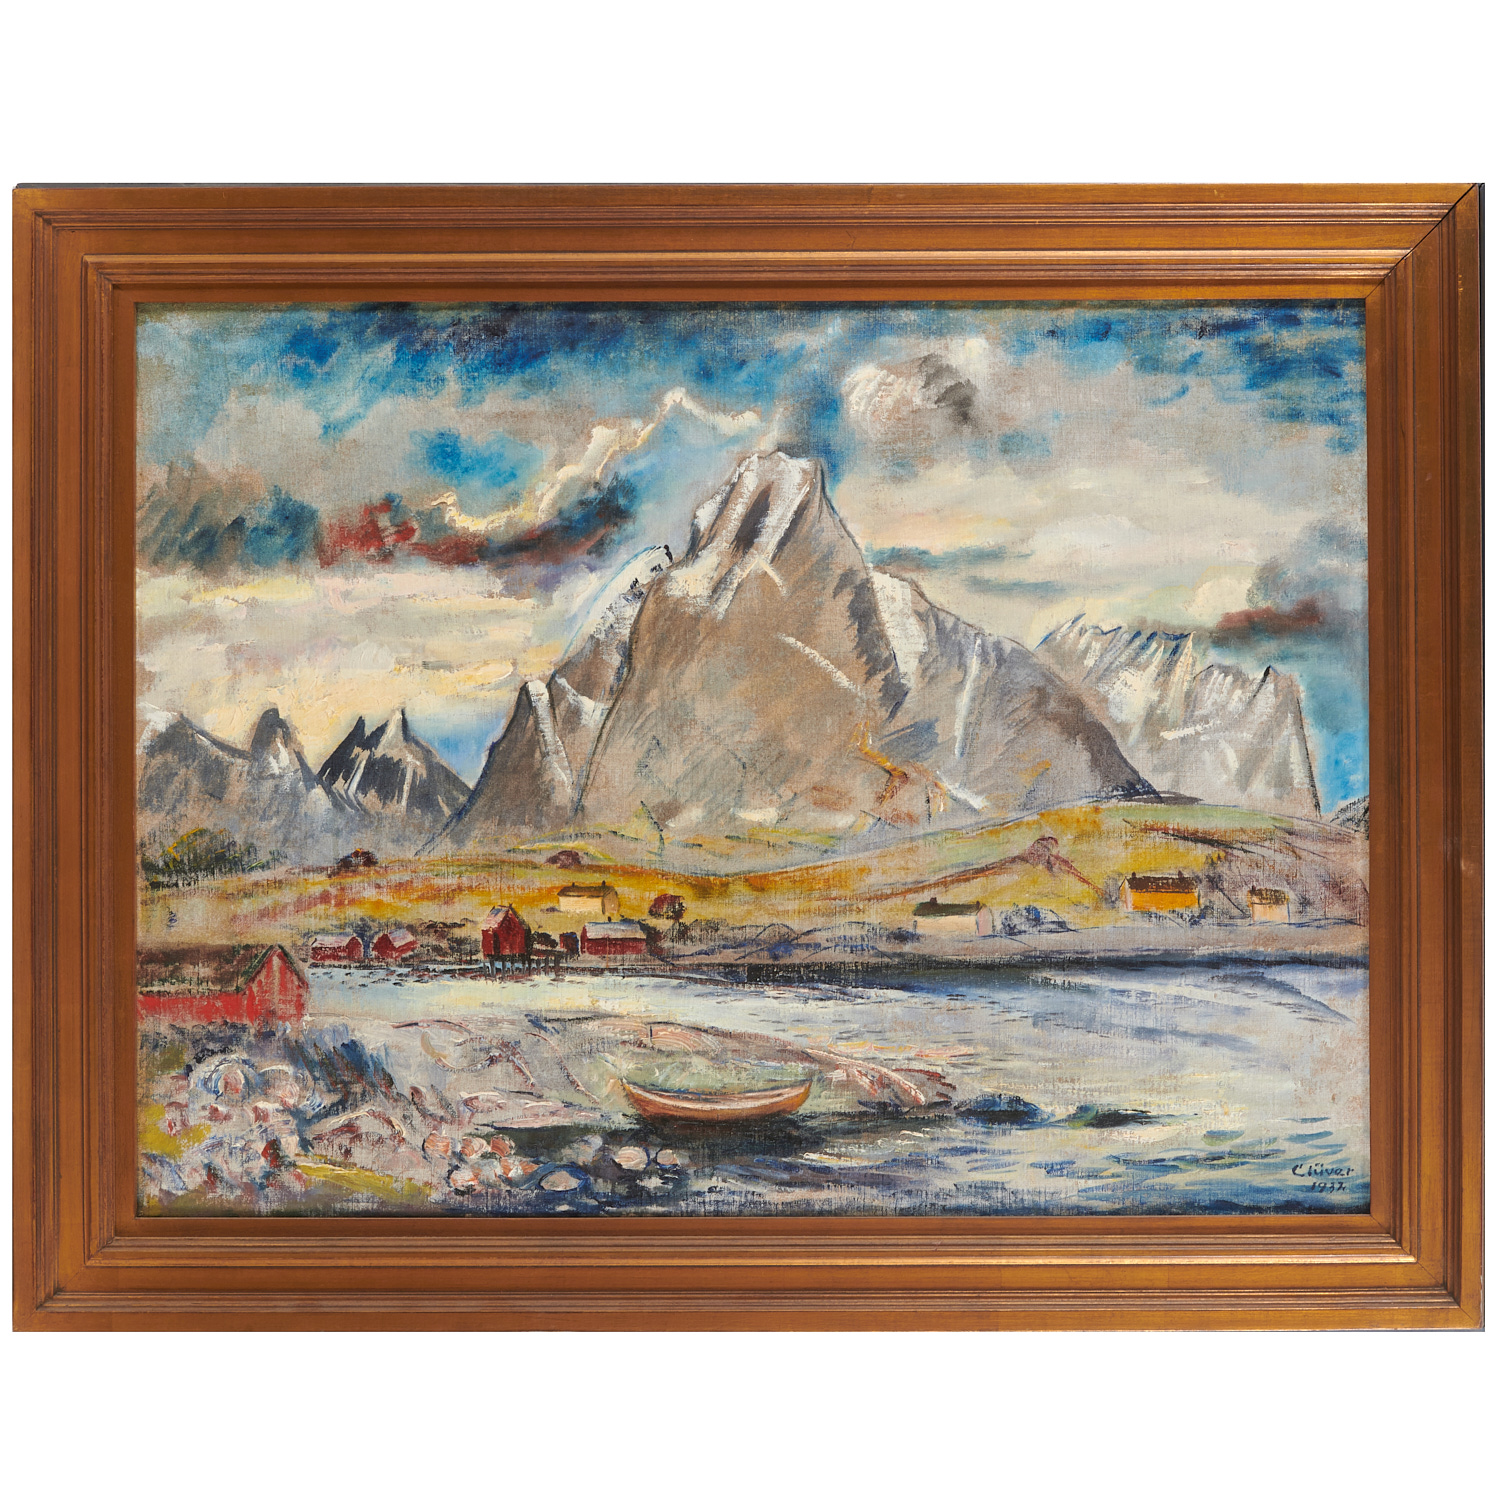 BERNT CLUVER, OIL ON CANVAS, 1932